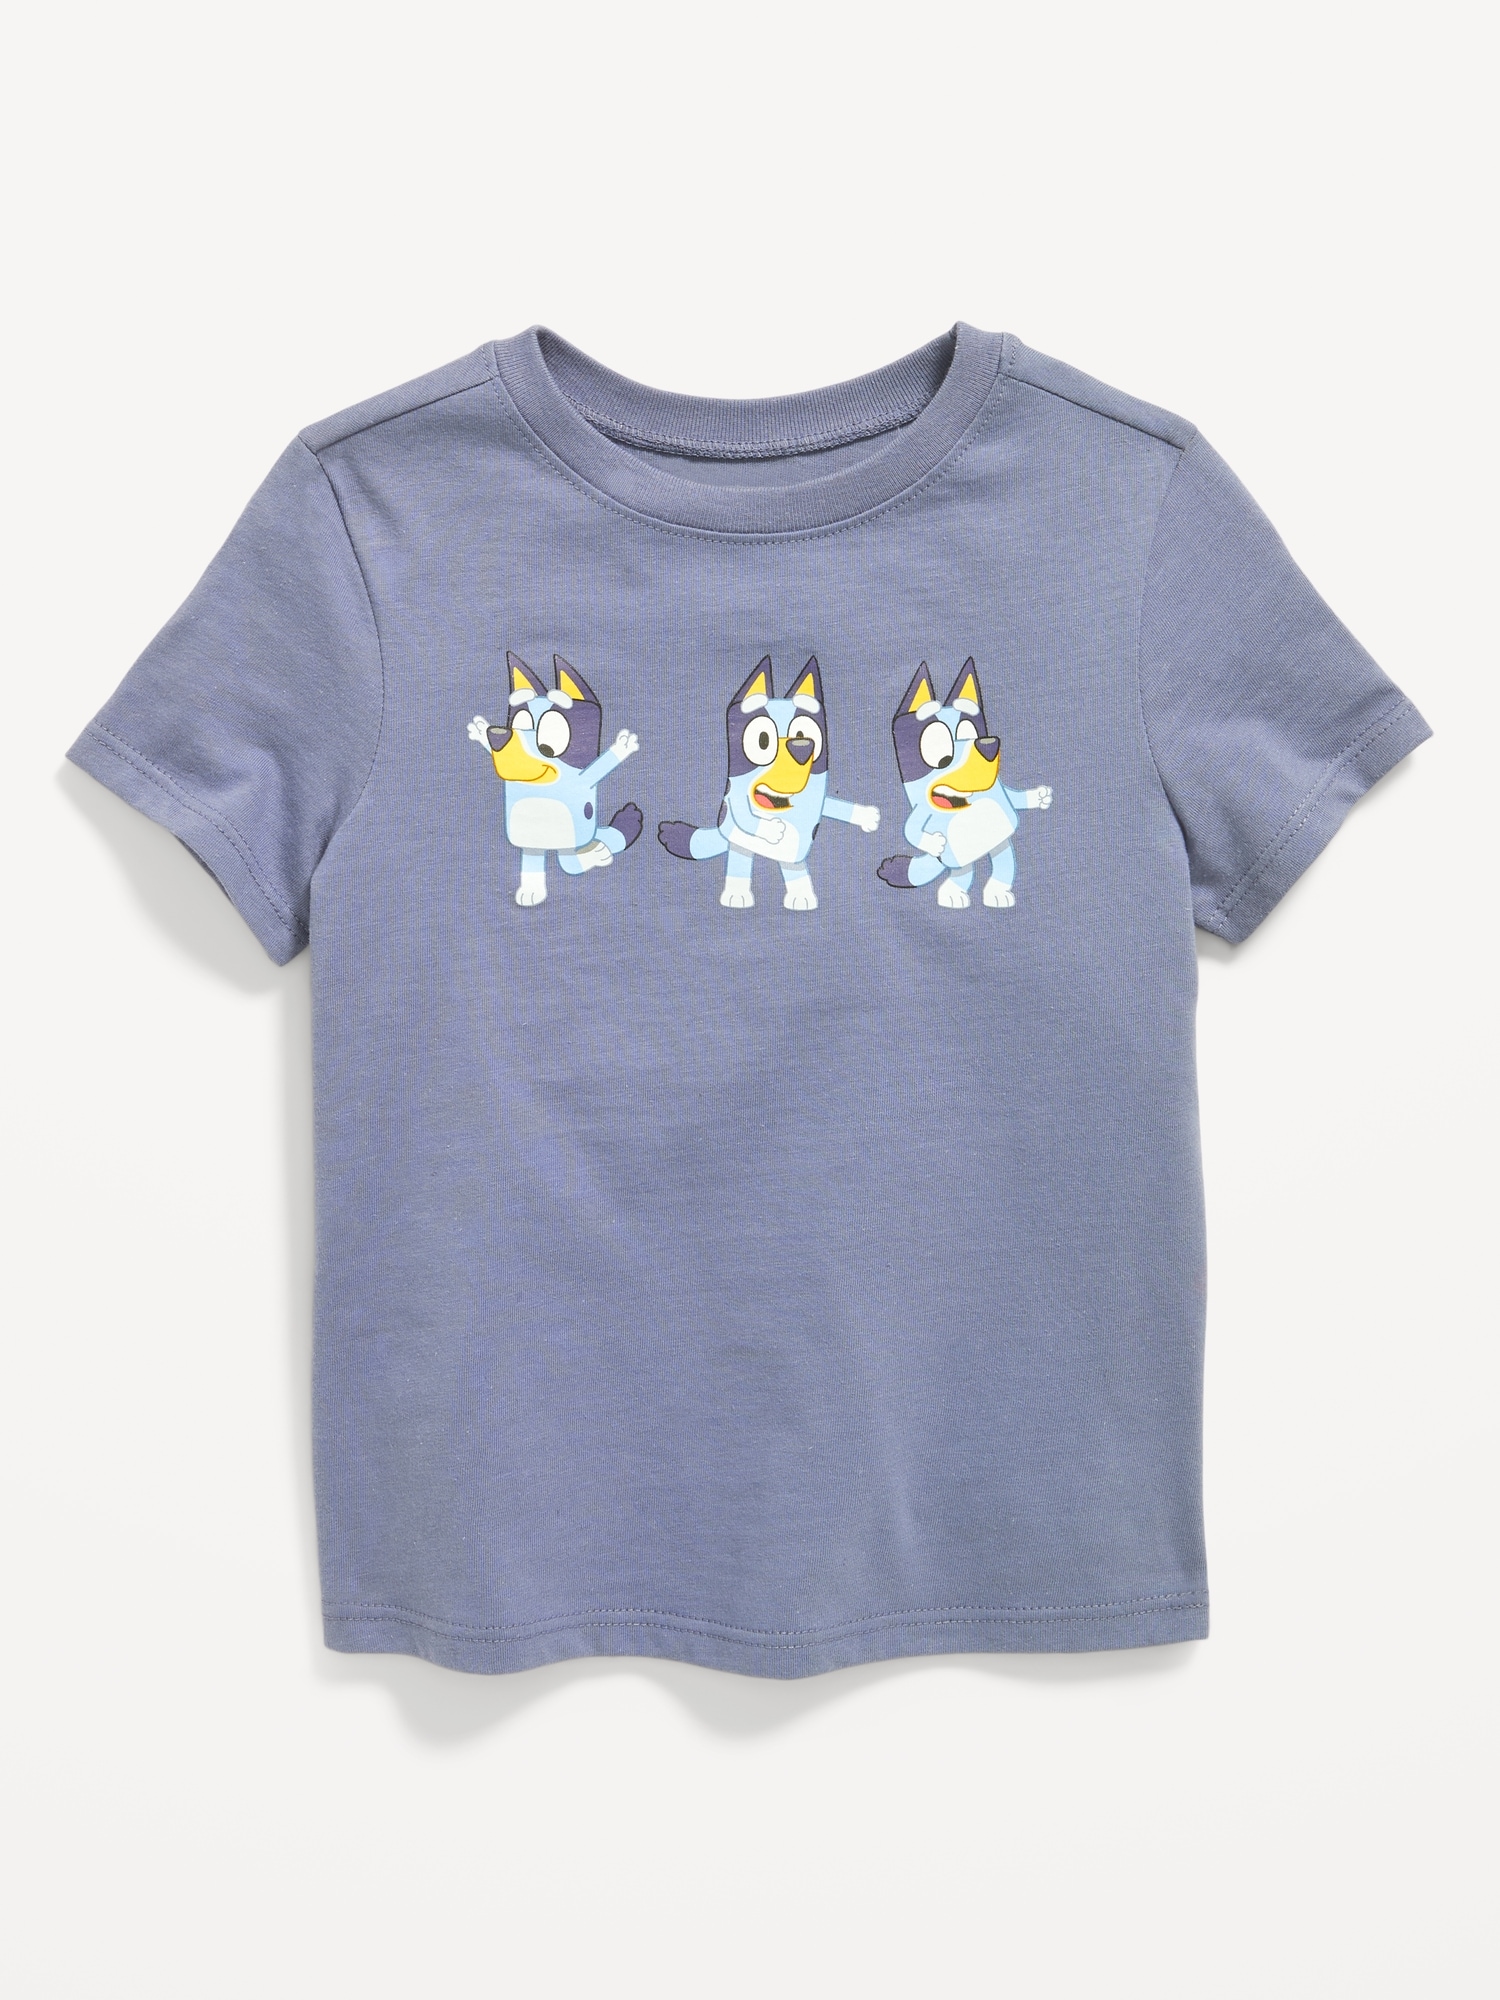 Old Navy Unisex Bluey Graphic T-Shirt for Toddler - - Size 2T